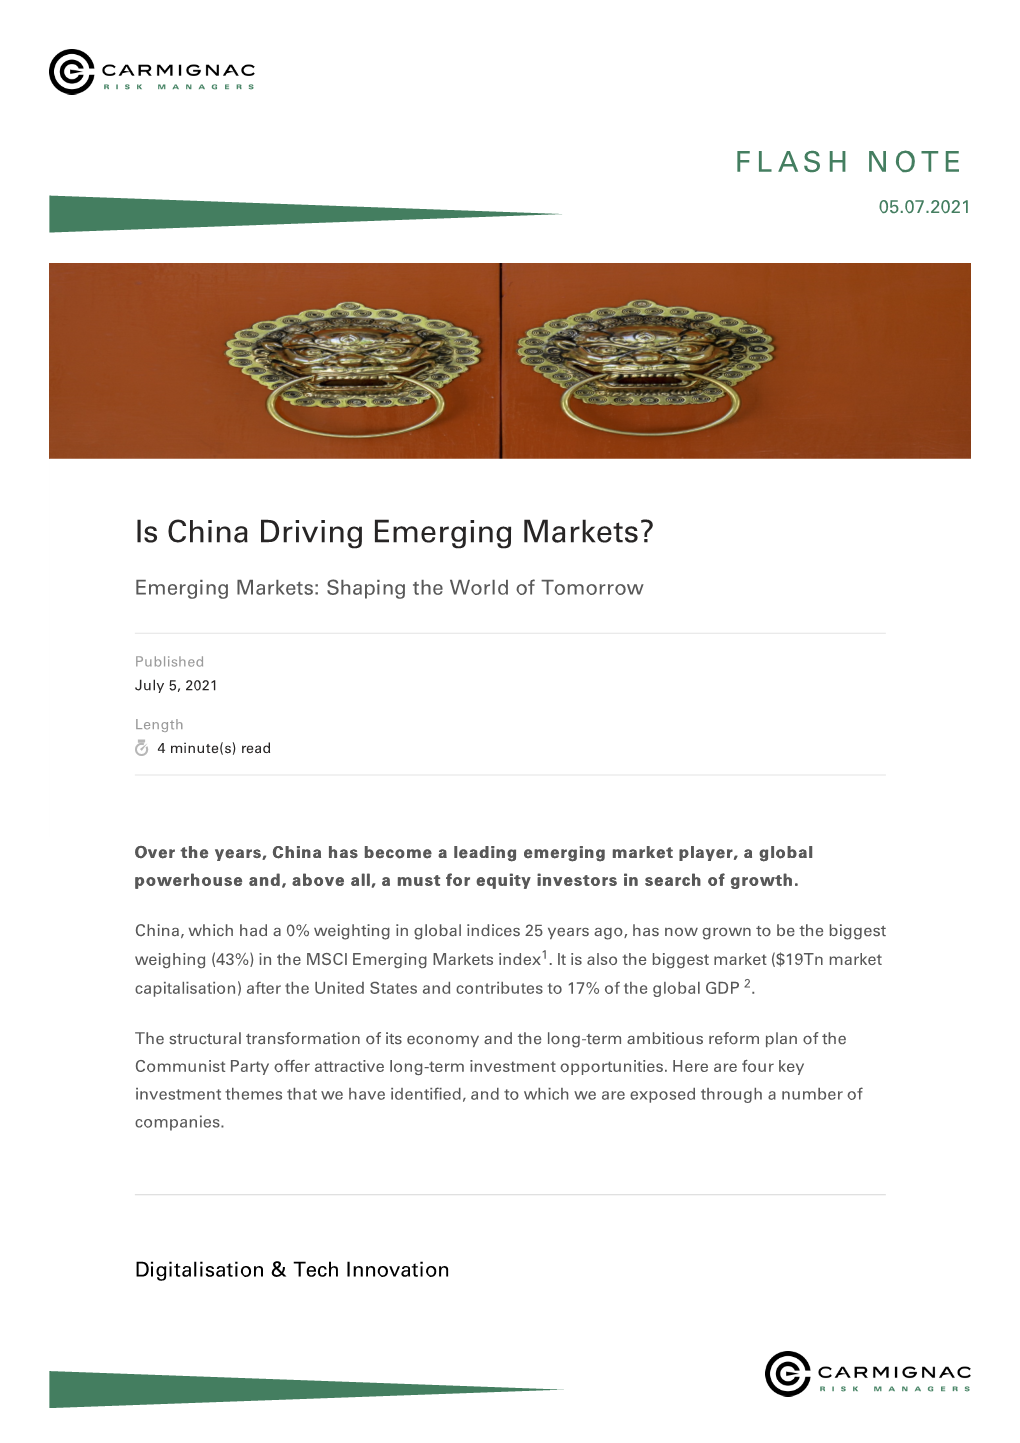 Is China Driving Emerging Markets?